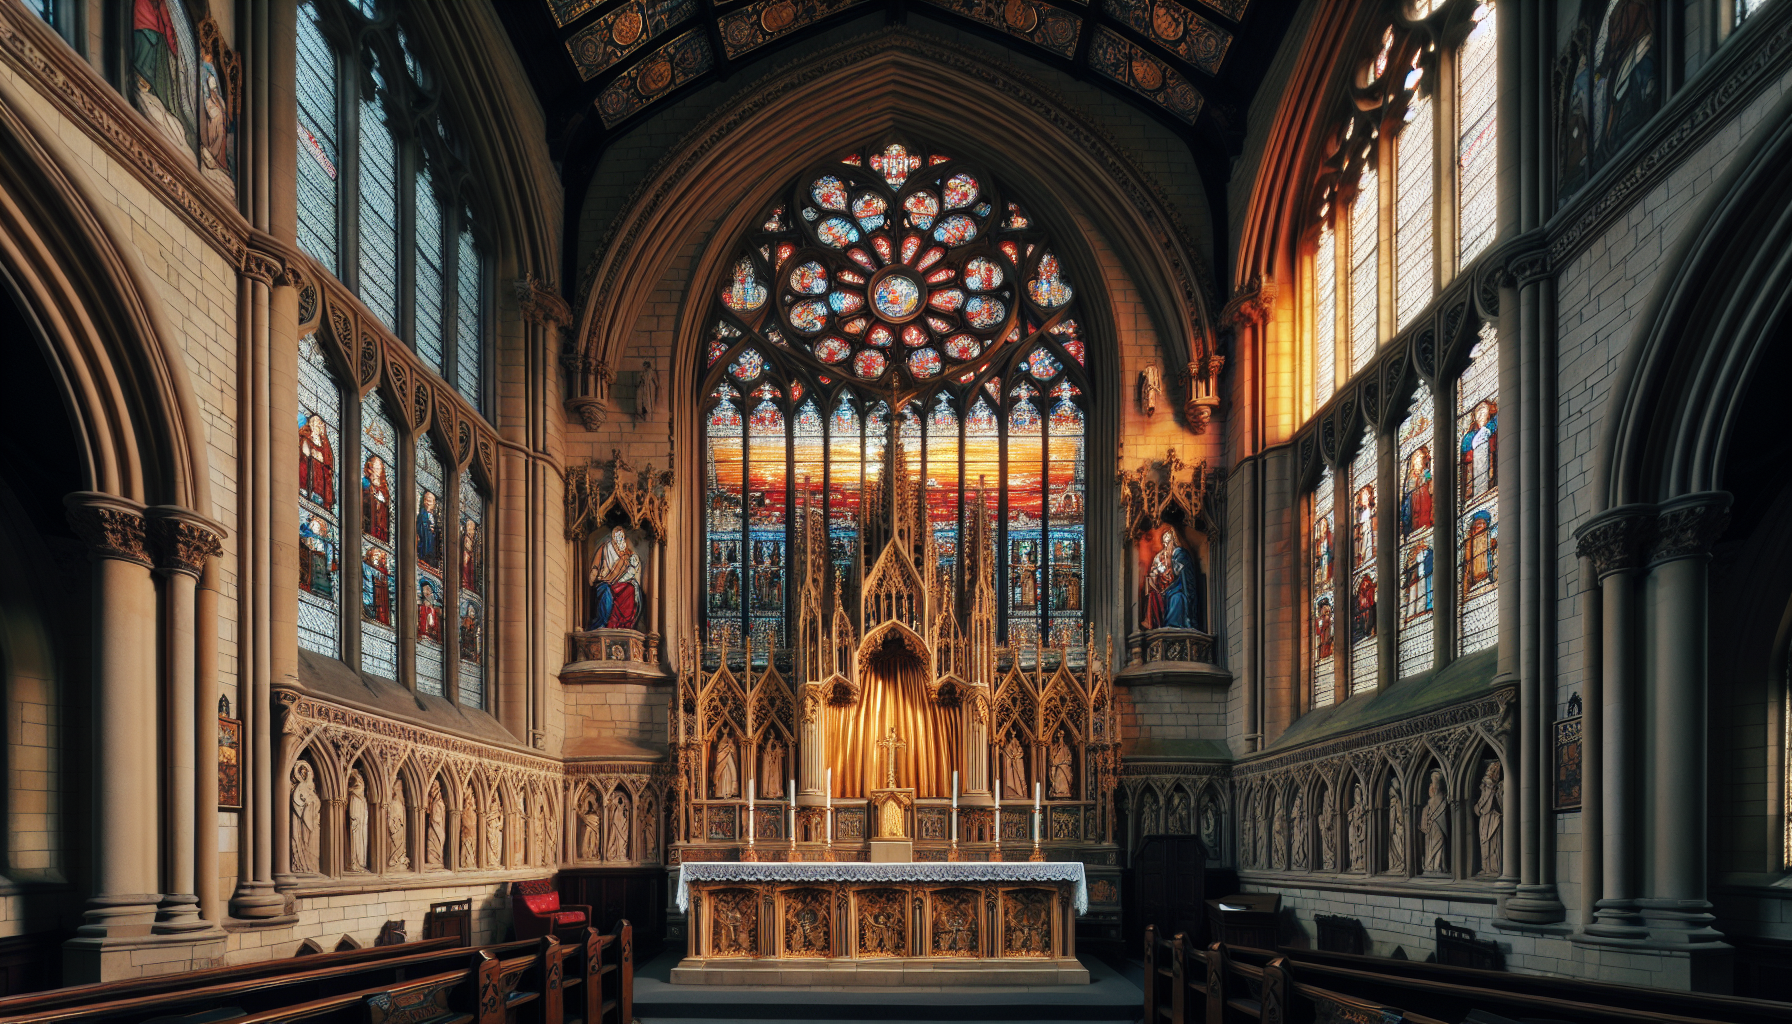 Architectural design of an Anglo-Catholic church interior